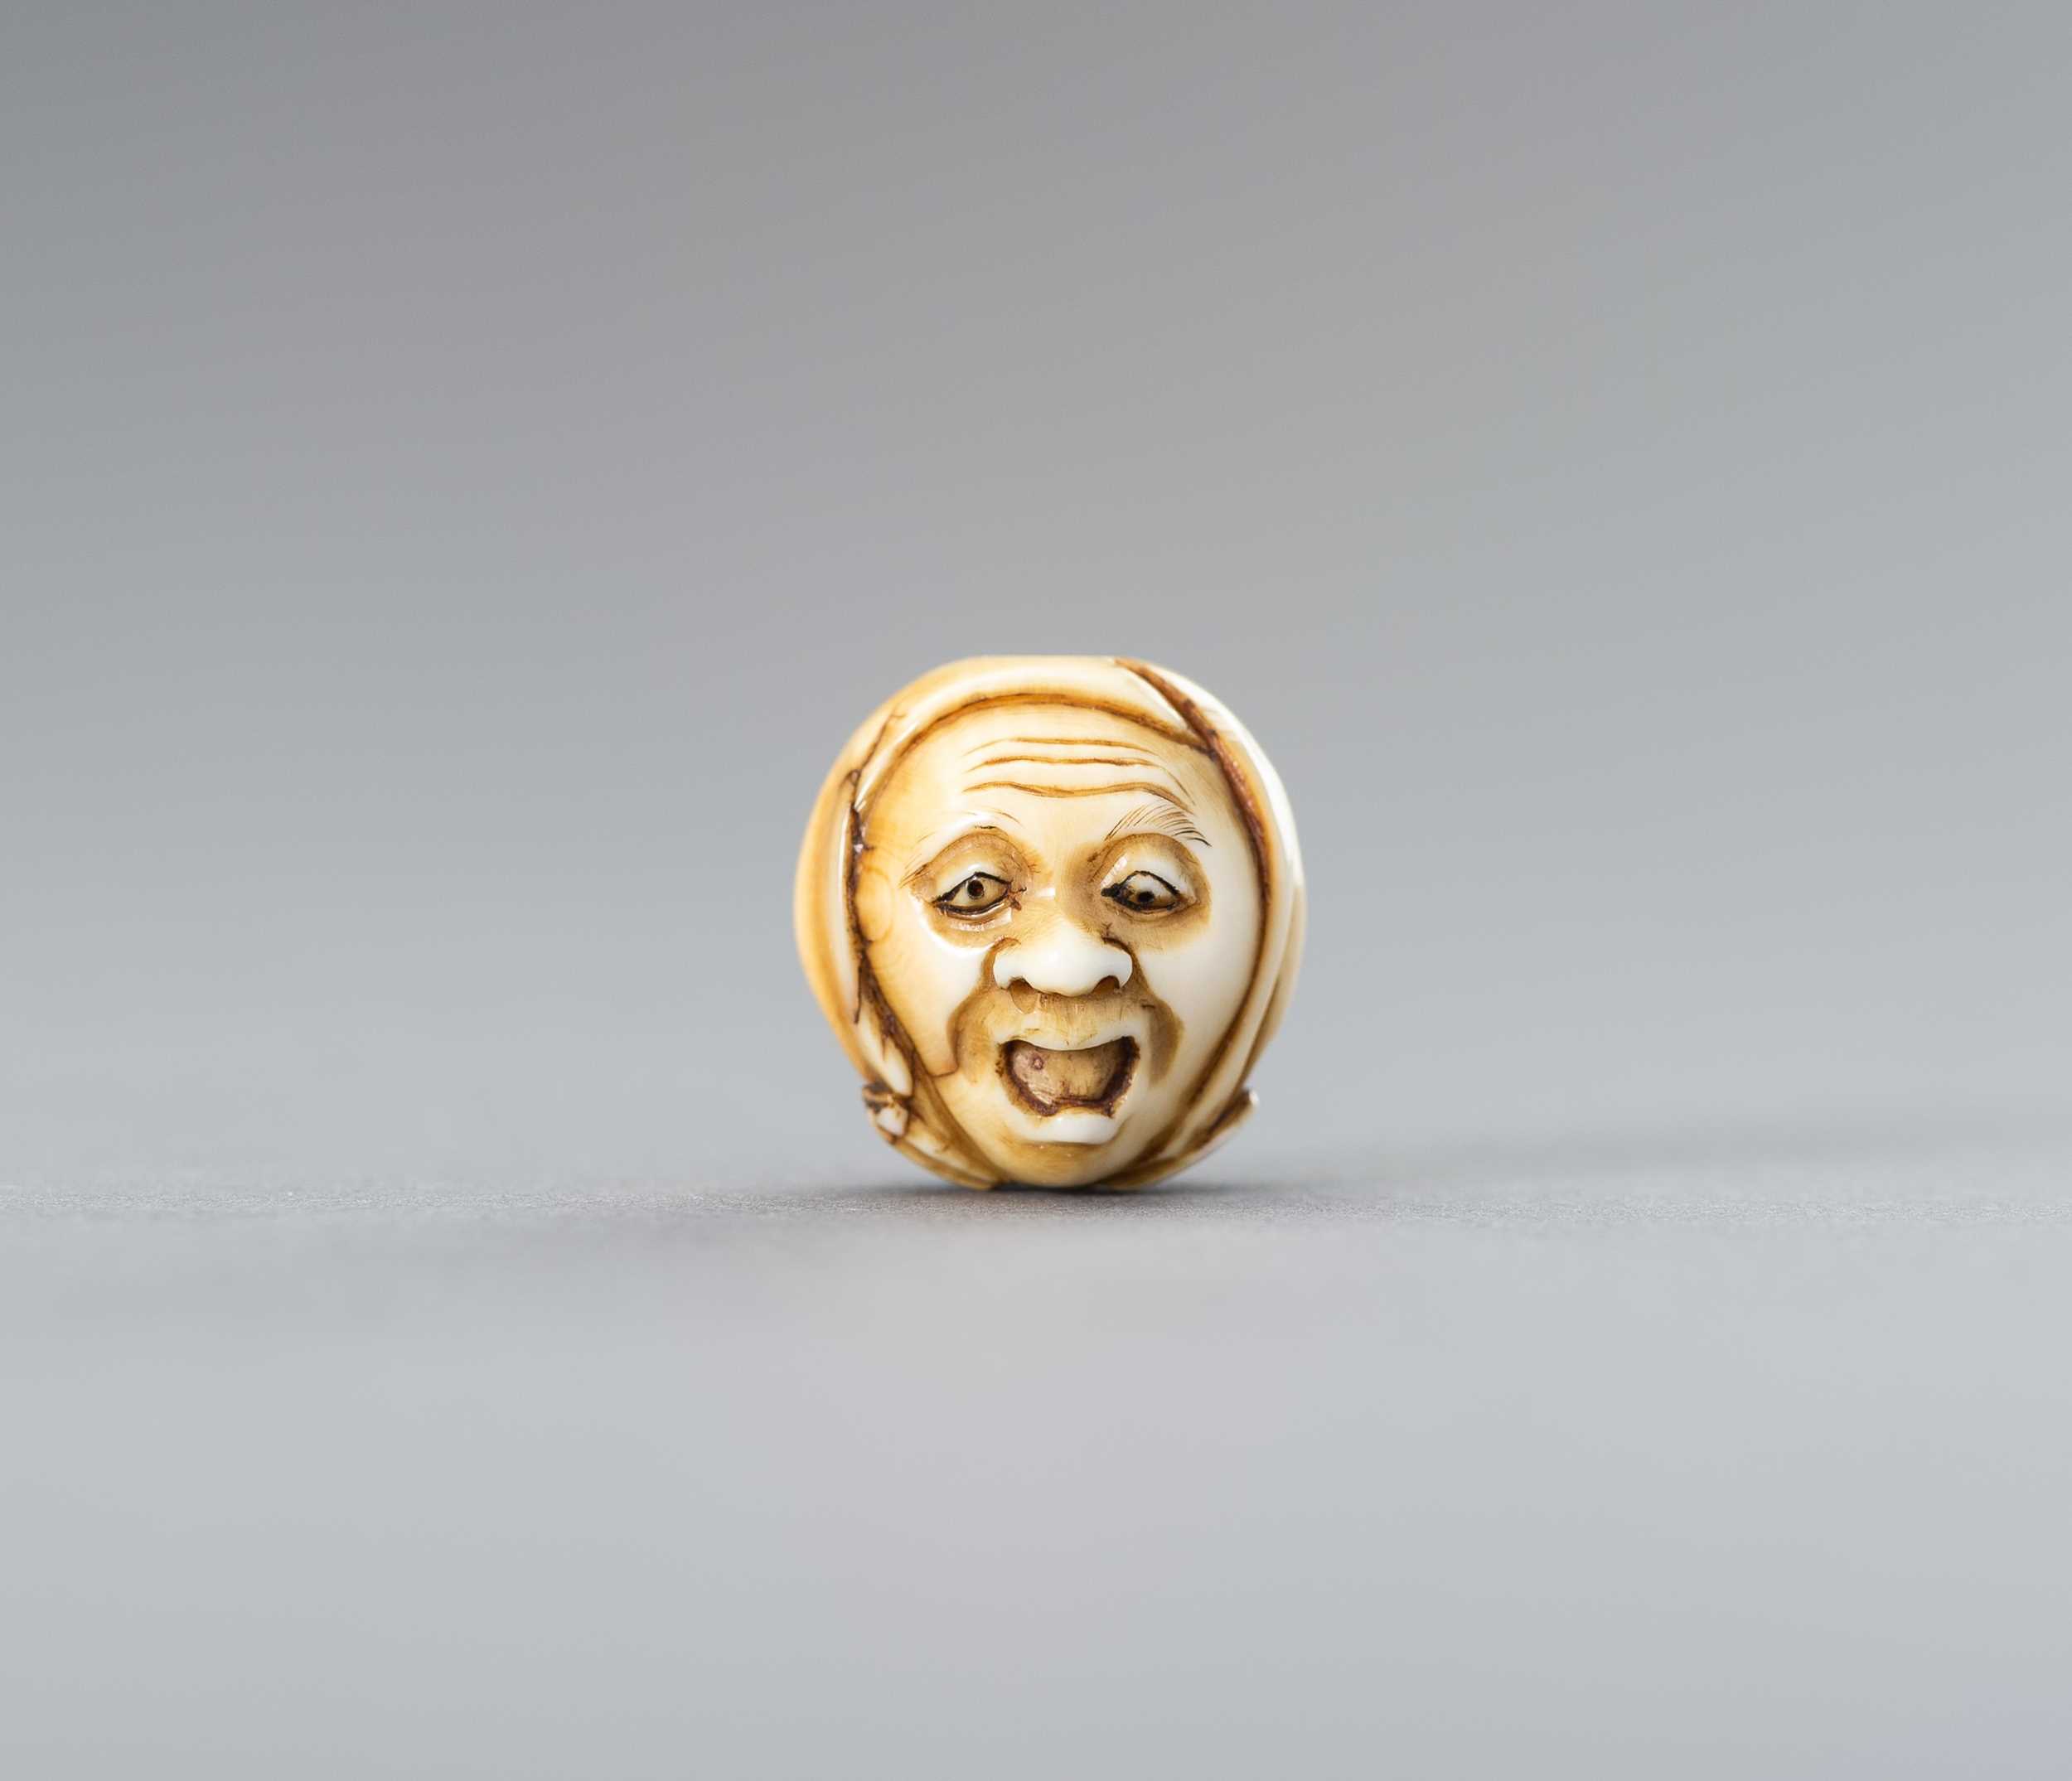 Lot 604 - AN IVORY OJIME WITH A YAWNING MAN